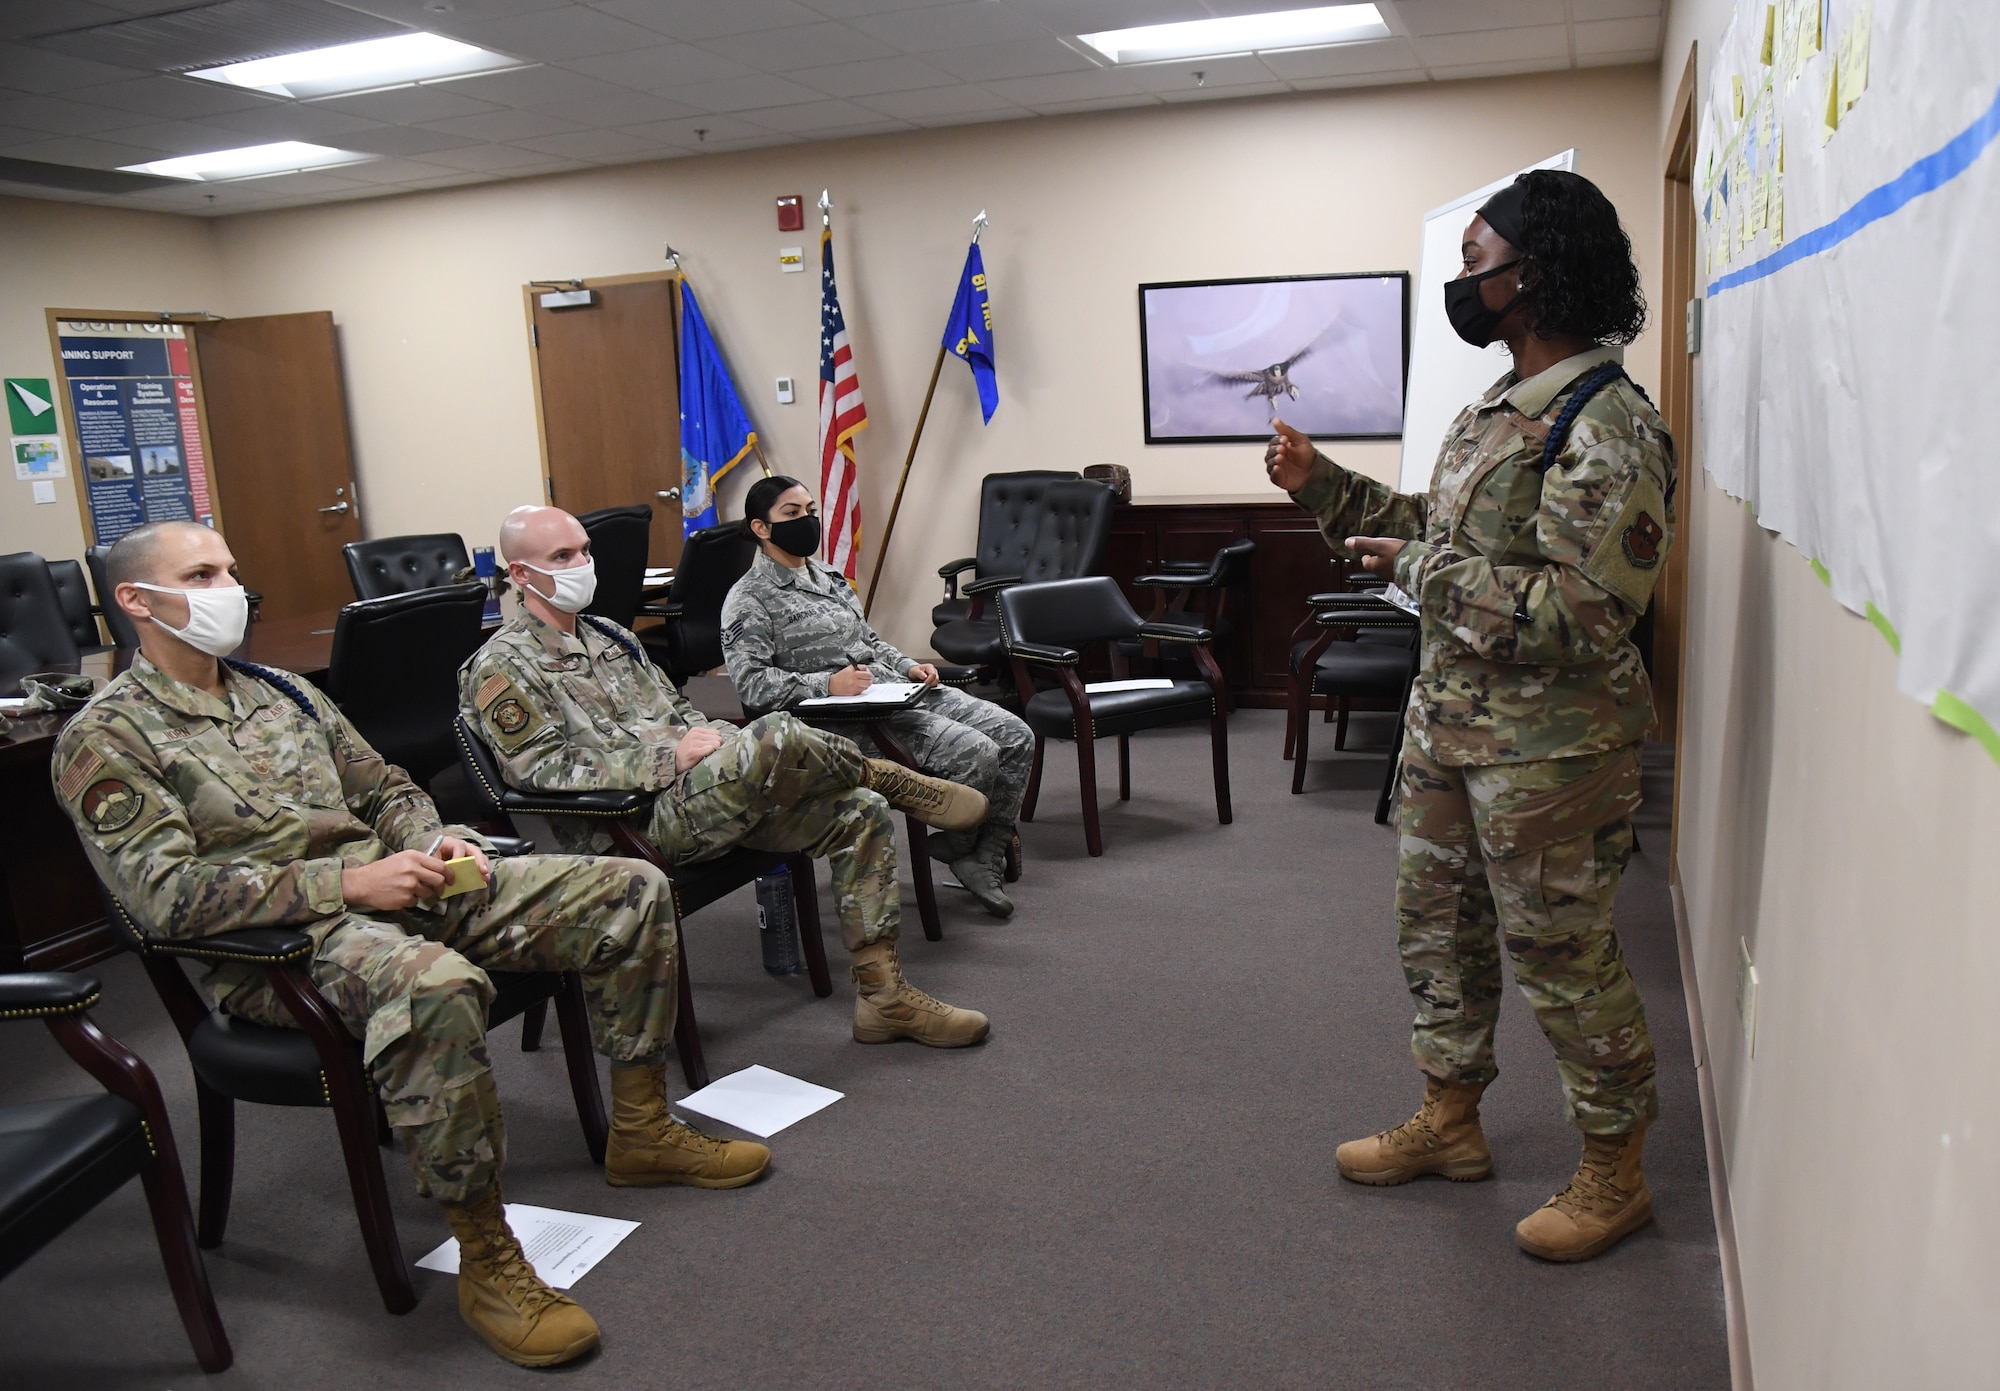 U.S. Air Force Tech. Sgt. Shandresha Mitchell, 335th Training Squadron military training leader, briefs attendees during the Continuous Process Improvement workshop inside Matero Hall at Keesler Air Force Base, Mississippi, October 1, 2020. The workshop included 81st Training Group military training instructors discussing ways of improvement for current procedures being followed by focusing on maximizing value, minimizing waste, sharing best practices and standardizing across the 81st TRG whenever and where ever possible. (U.S. Air Force photo by Kemberly Groue)